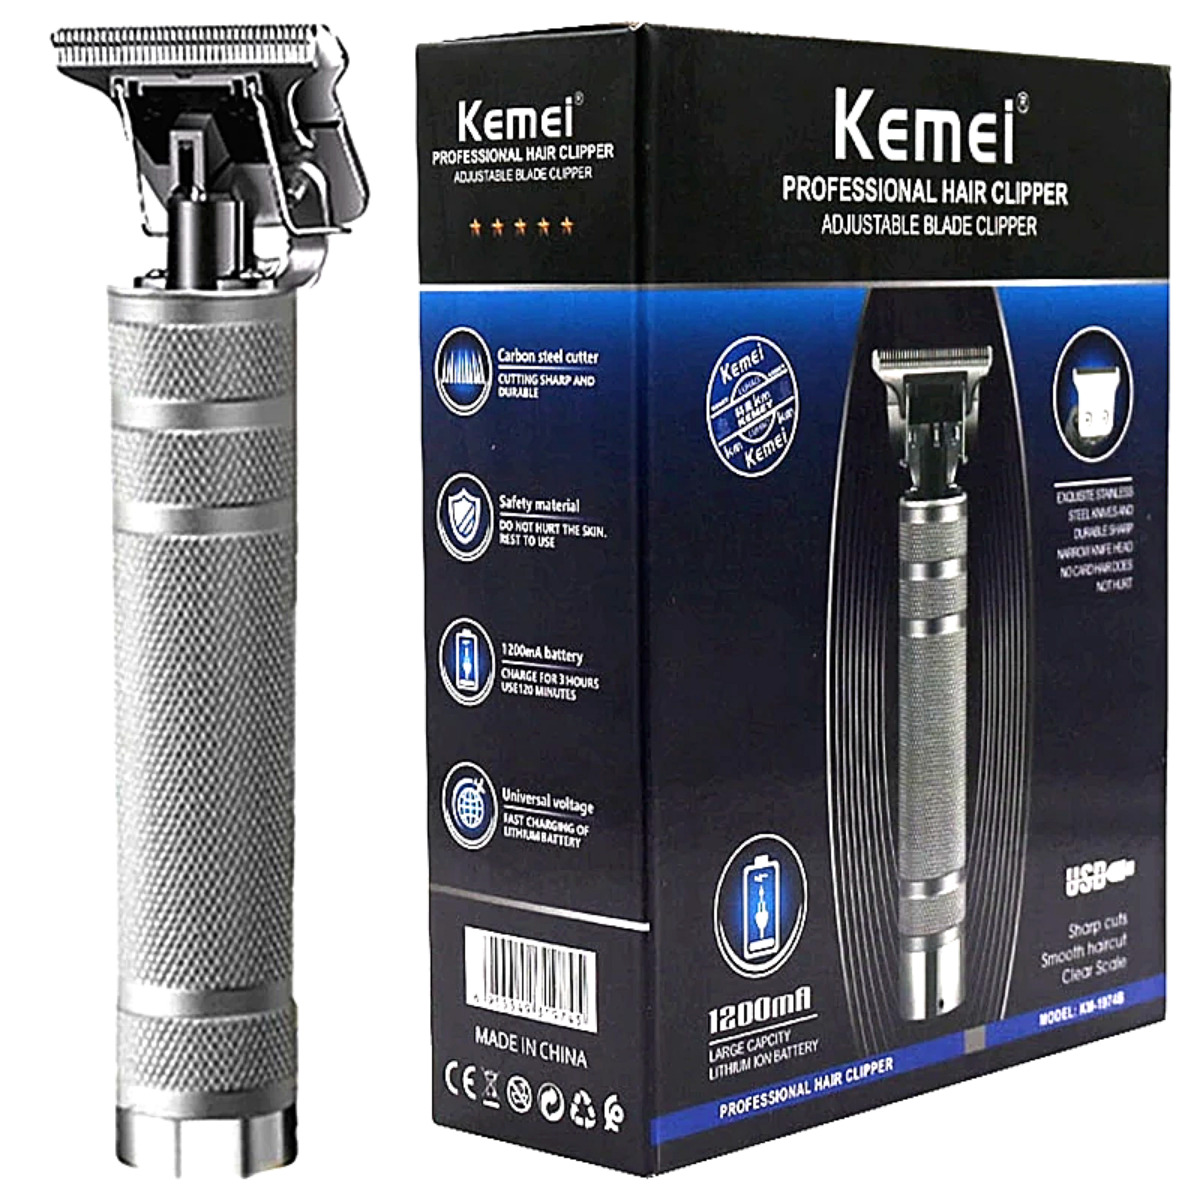 Kemei Silver Cordless Hair Clippers Trimmer Shaver Clipper Cutting Beard Barber